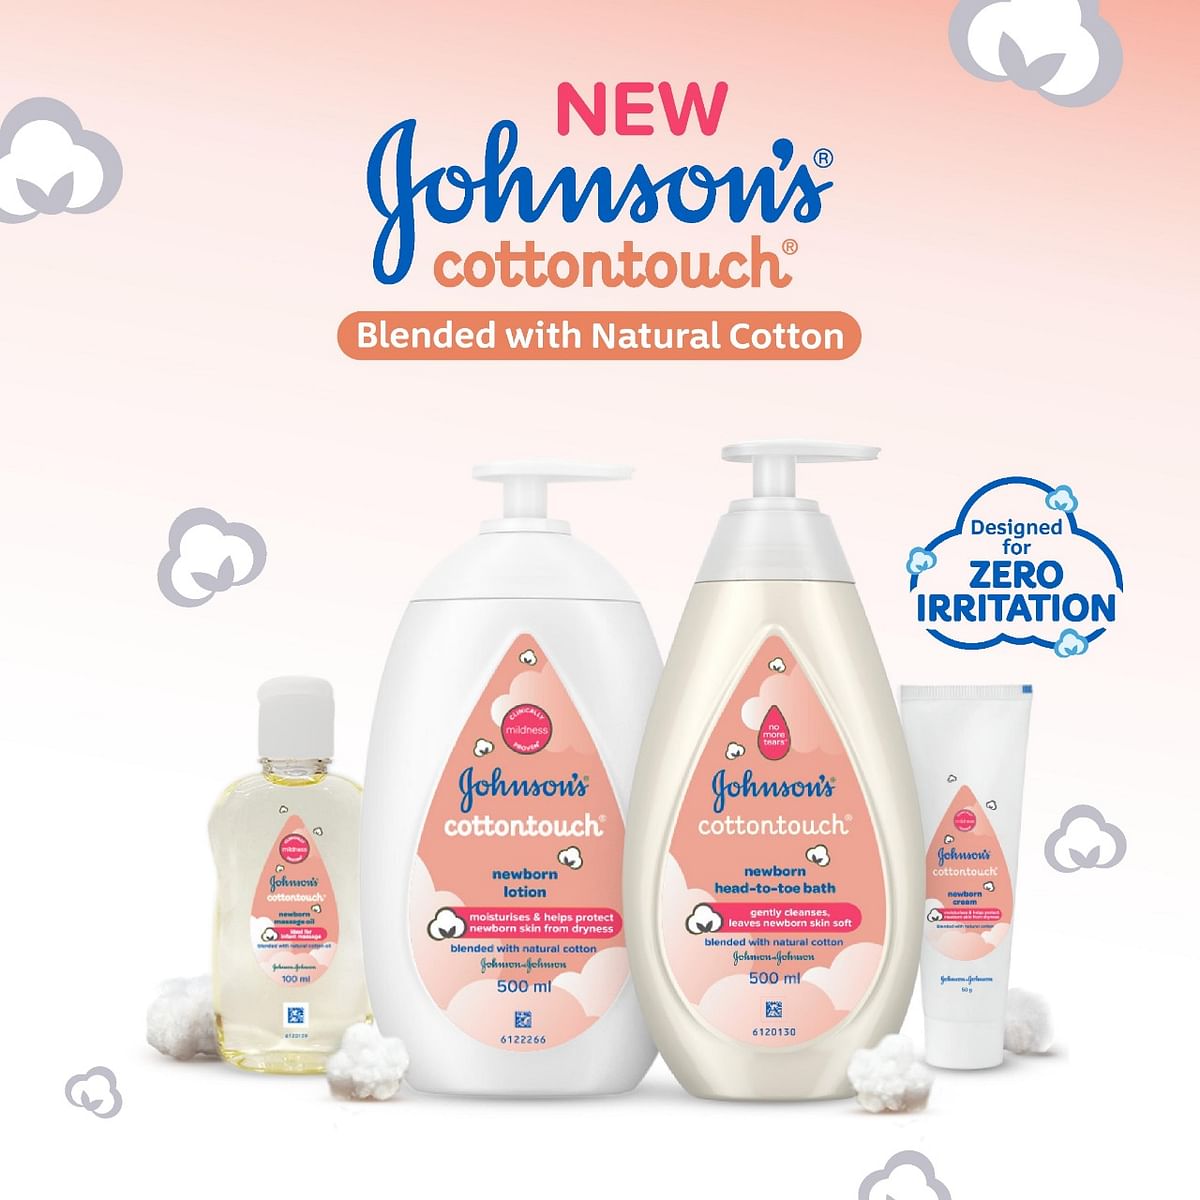 Johnson's Baby brings new range of baby care products